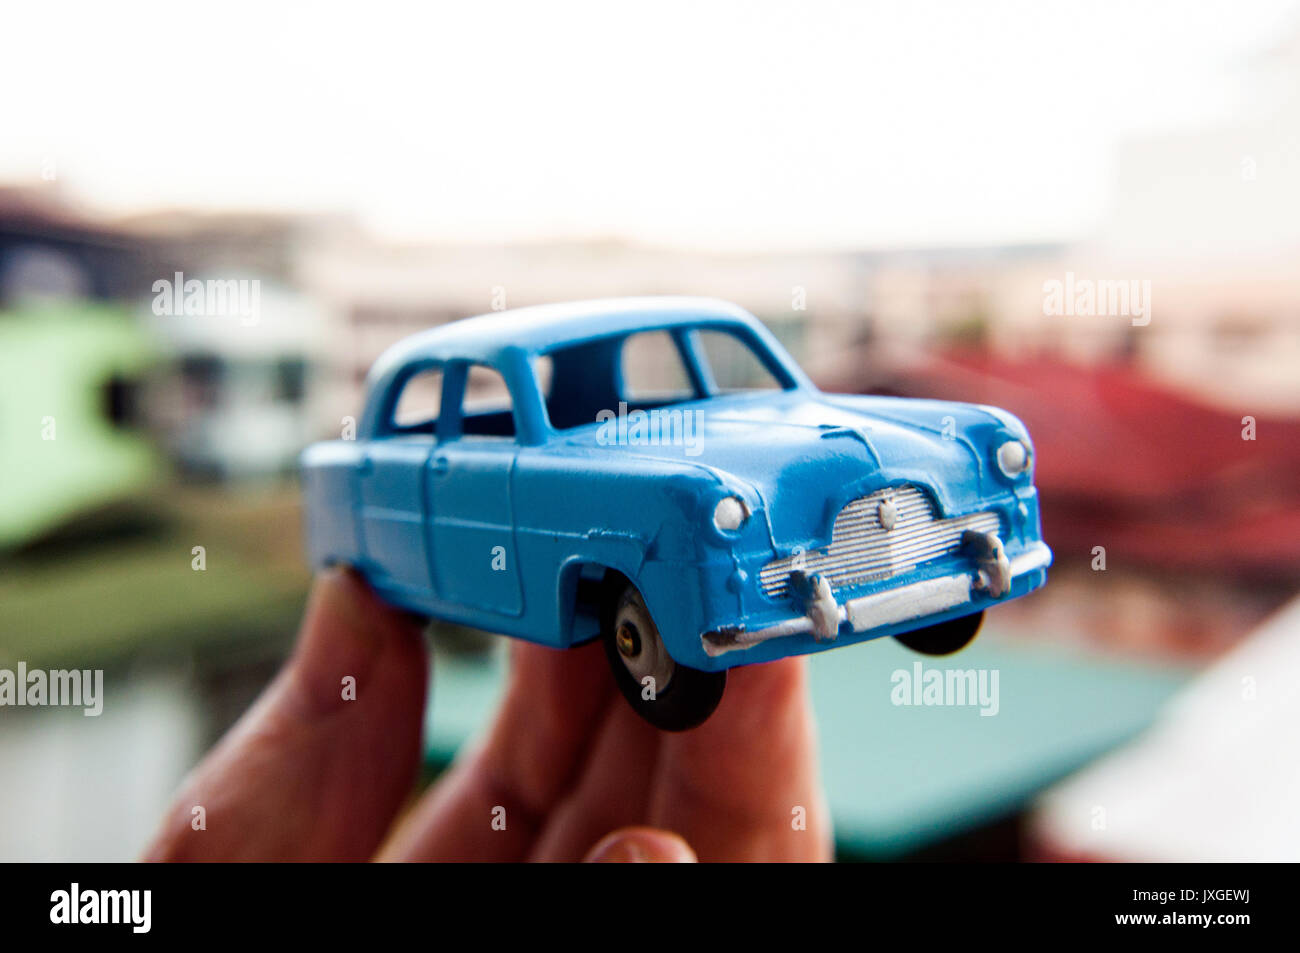 Vintage model Ford Zephyr car on location with house roofs Stock Photo